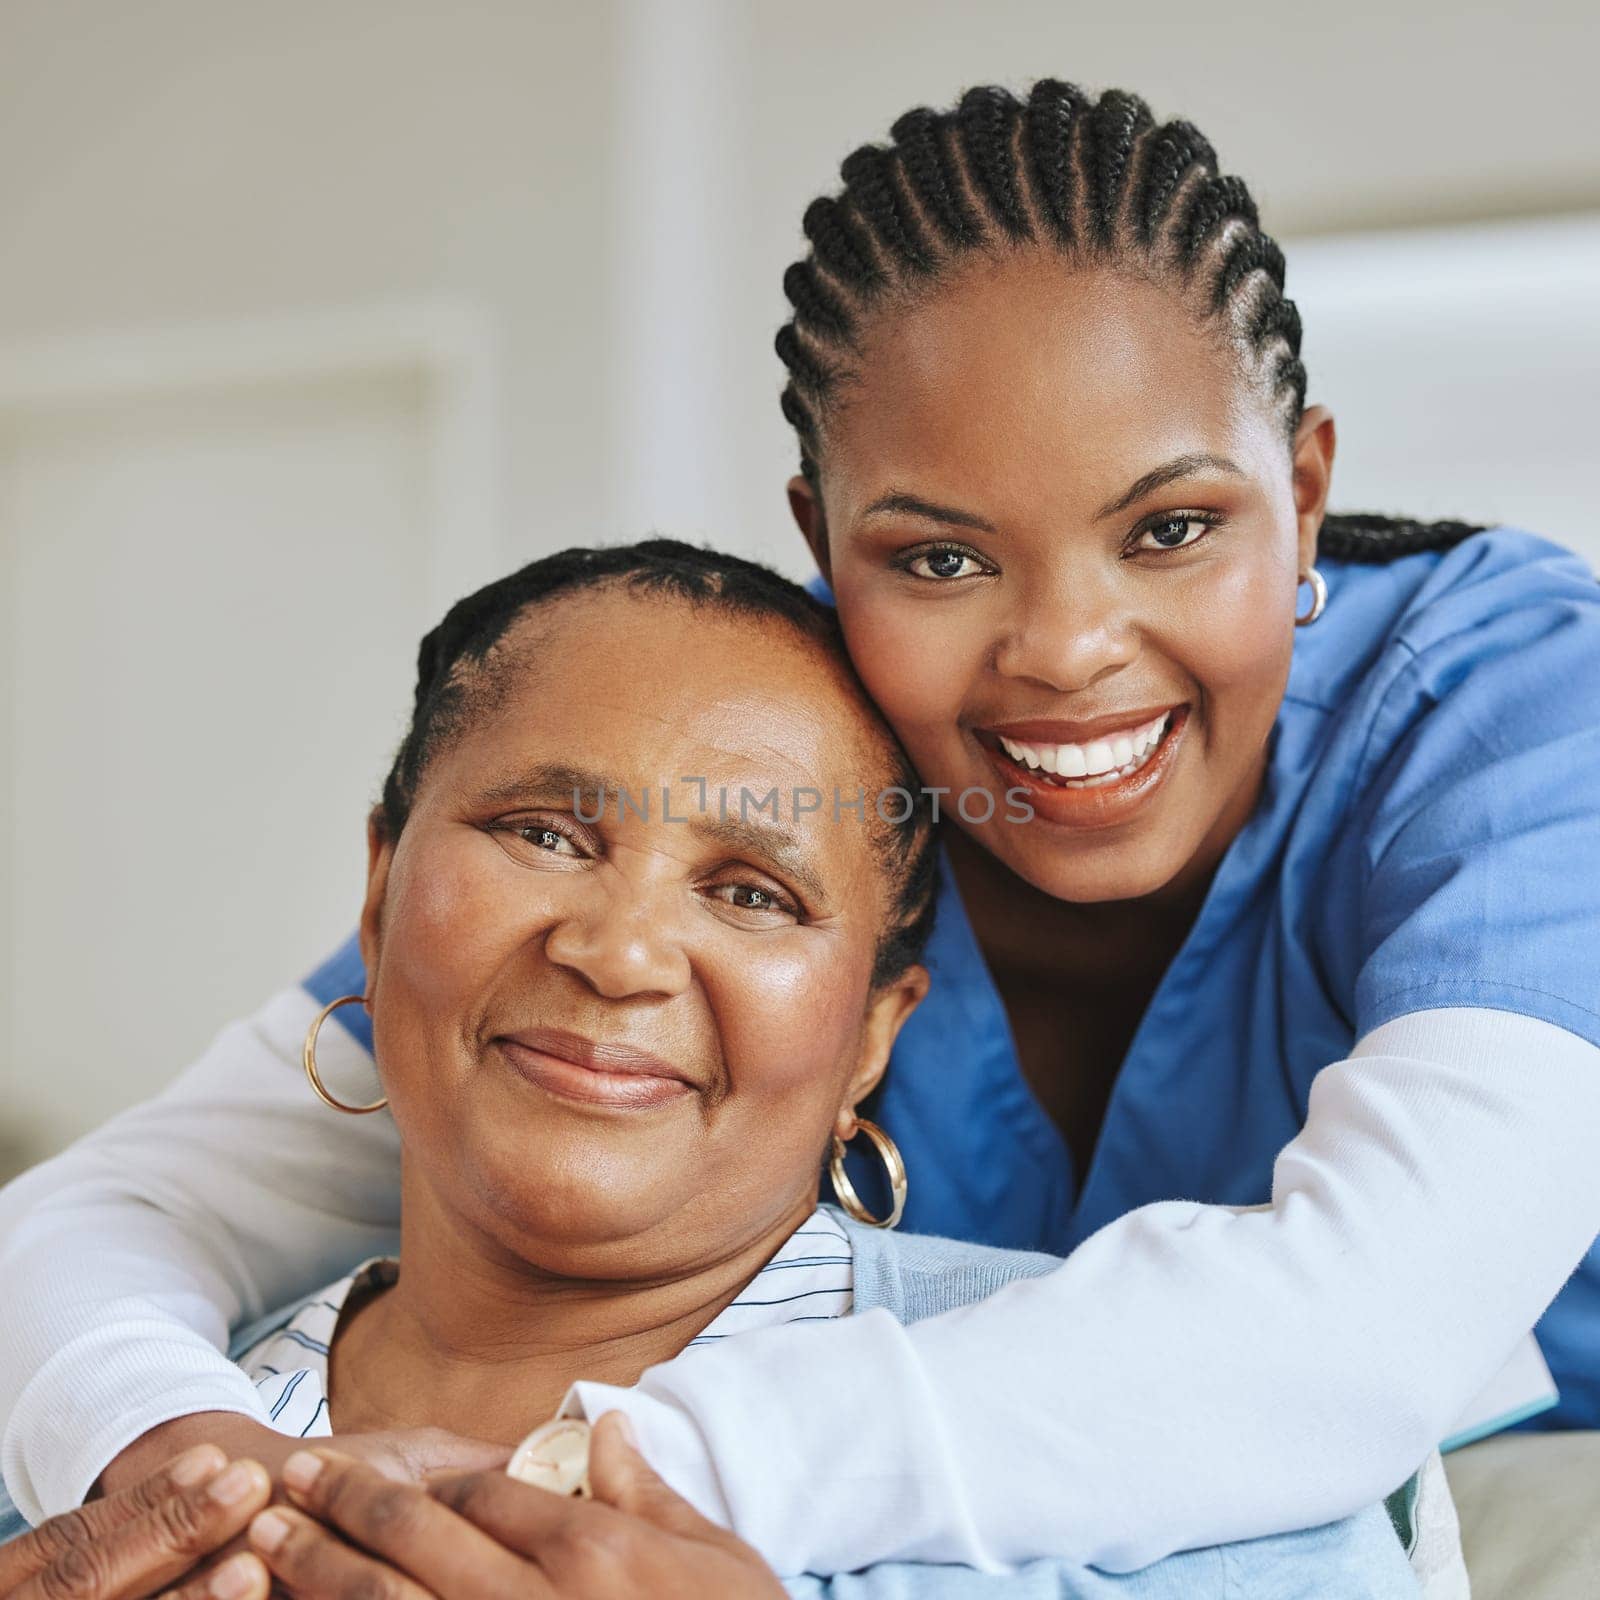 Senior patient, nurse woman and hug portrait for support, healthcare and happiness at retirement home. Face of black person and caregiver together for elderly care and help for health and wellness.